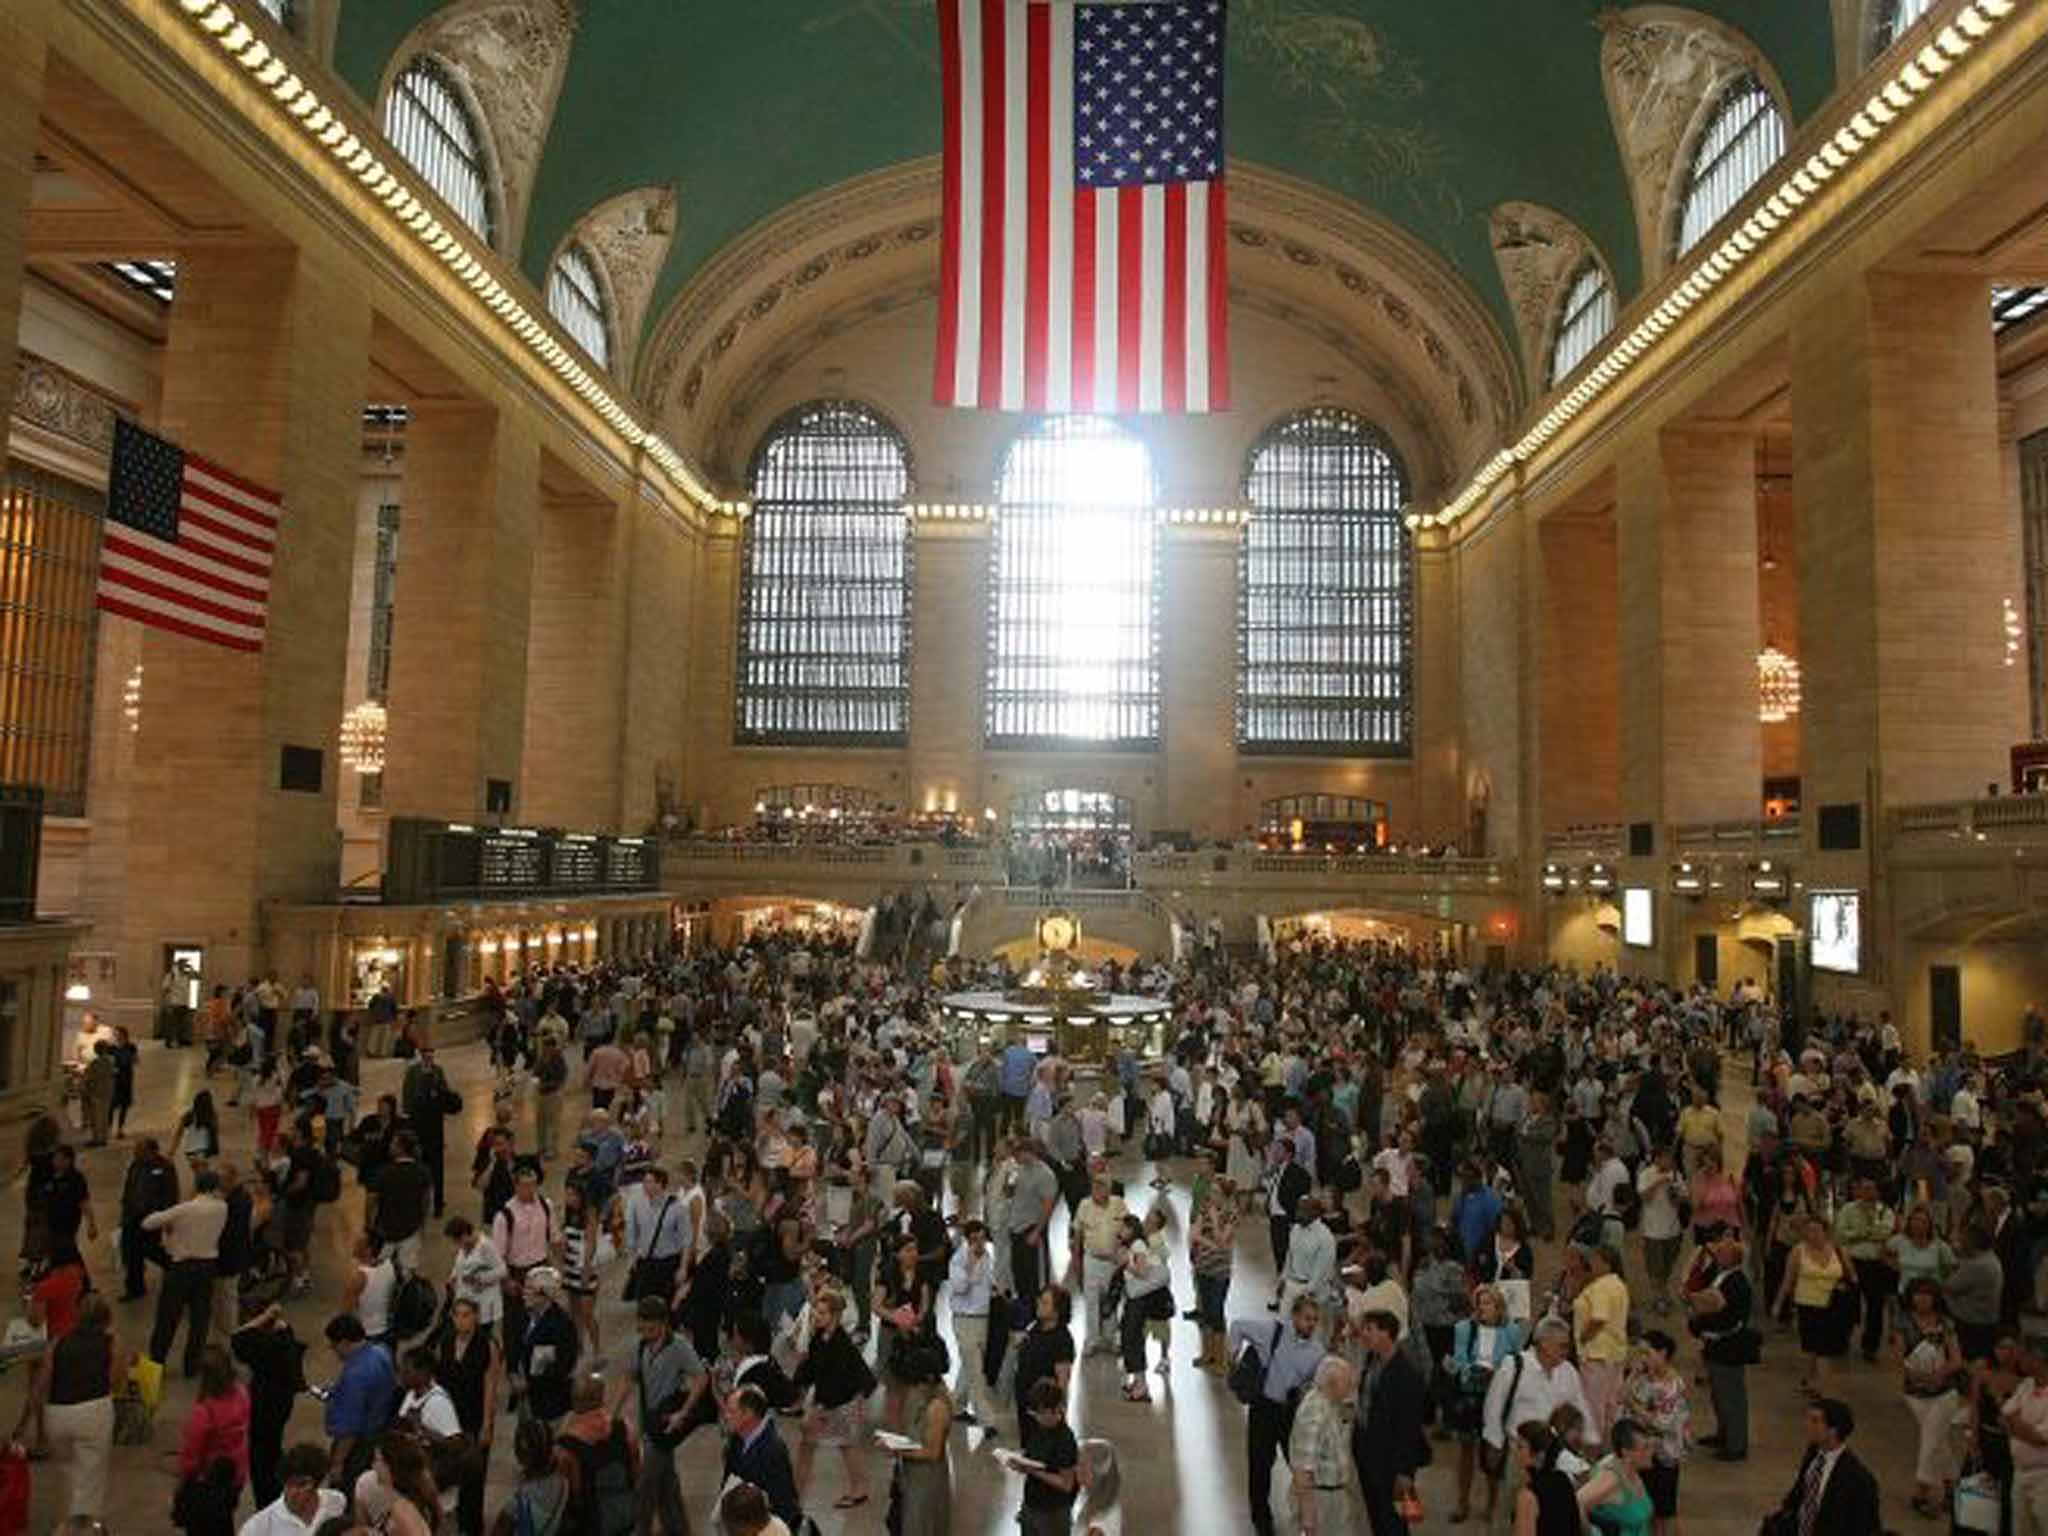 &#13;
Just the ticket: New York's Grand Central Terminal &#13;